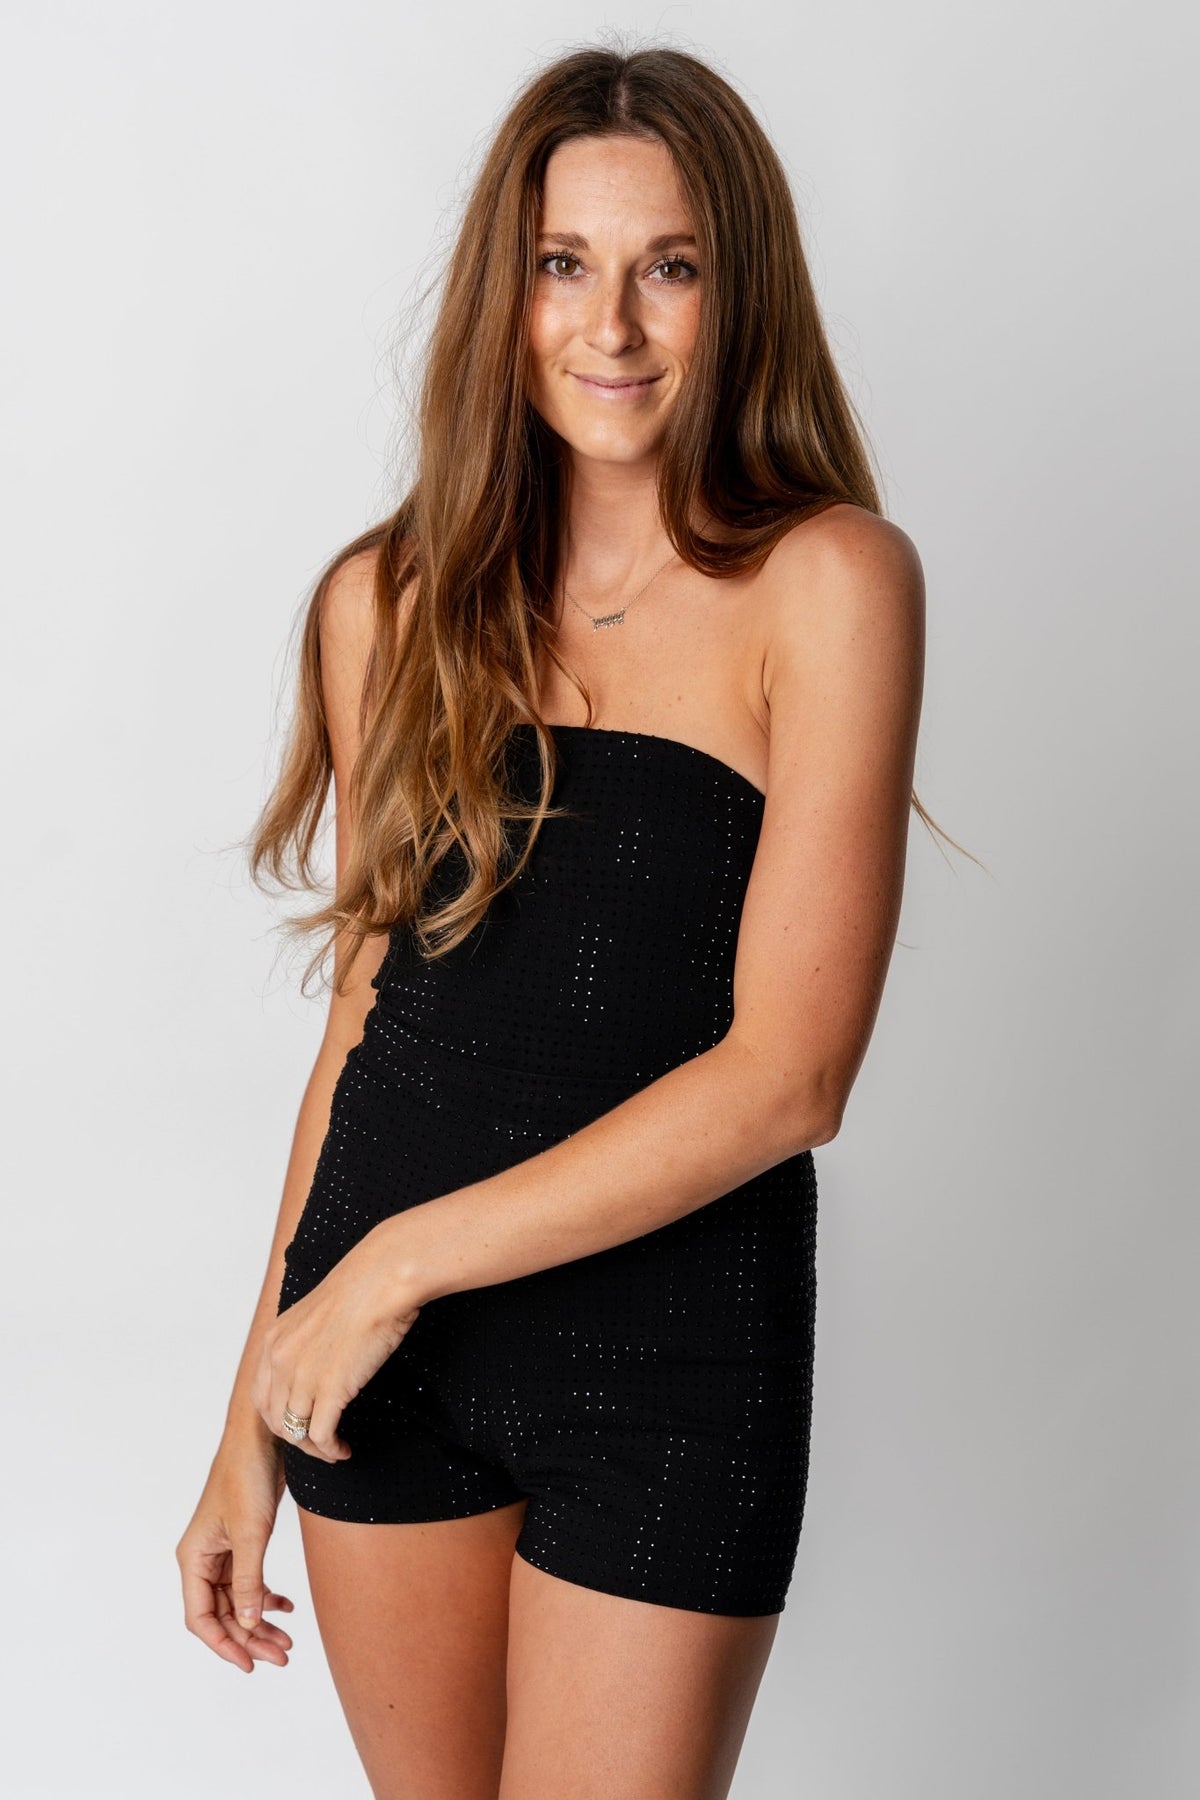 Rhinestone romper black - Cute Romper - Trendy Rompers and Pantsuits at Lush Fashion Lounge Boutique in Oklahoma City